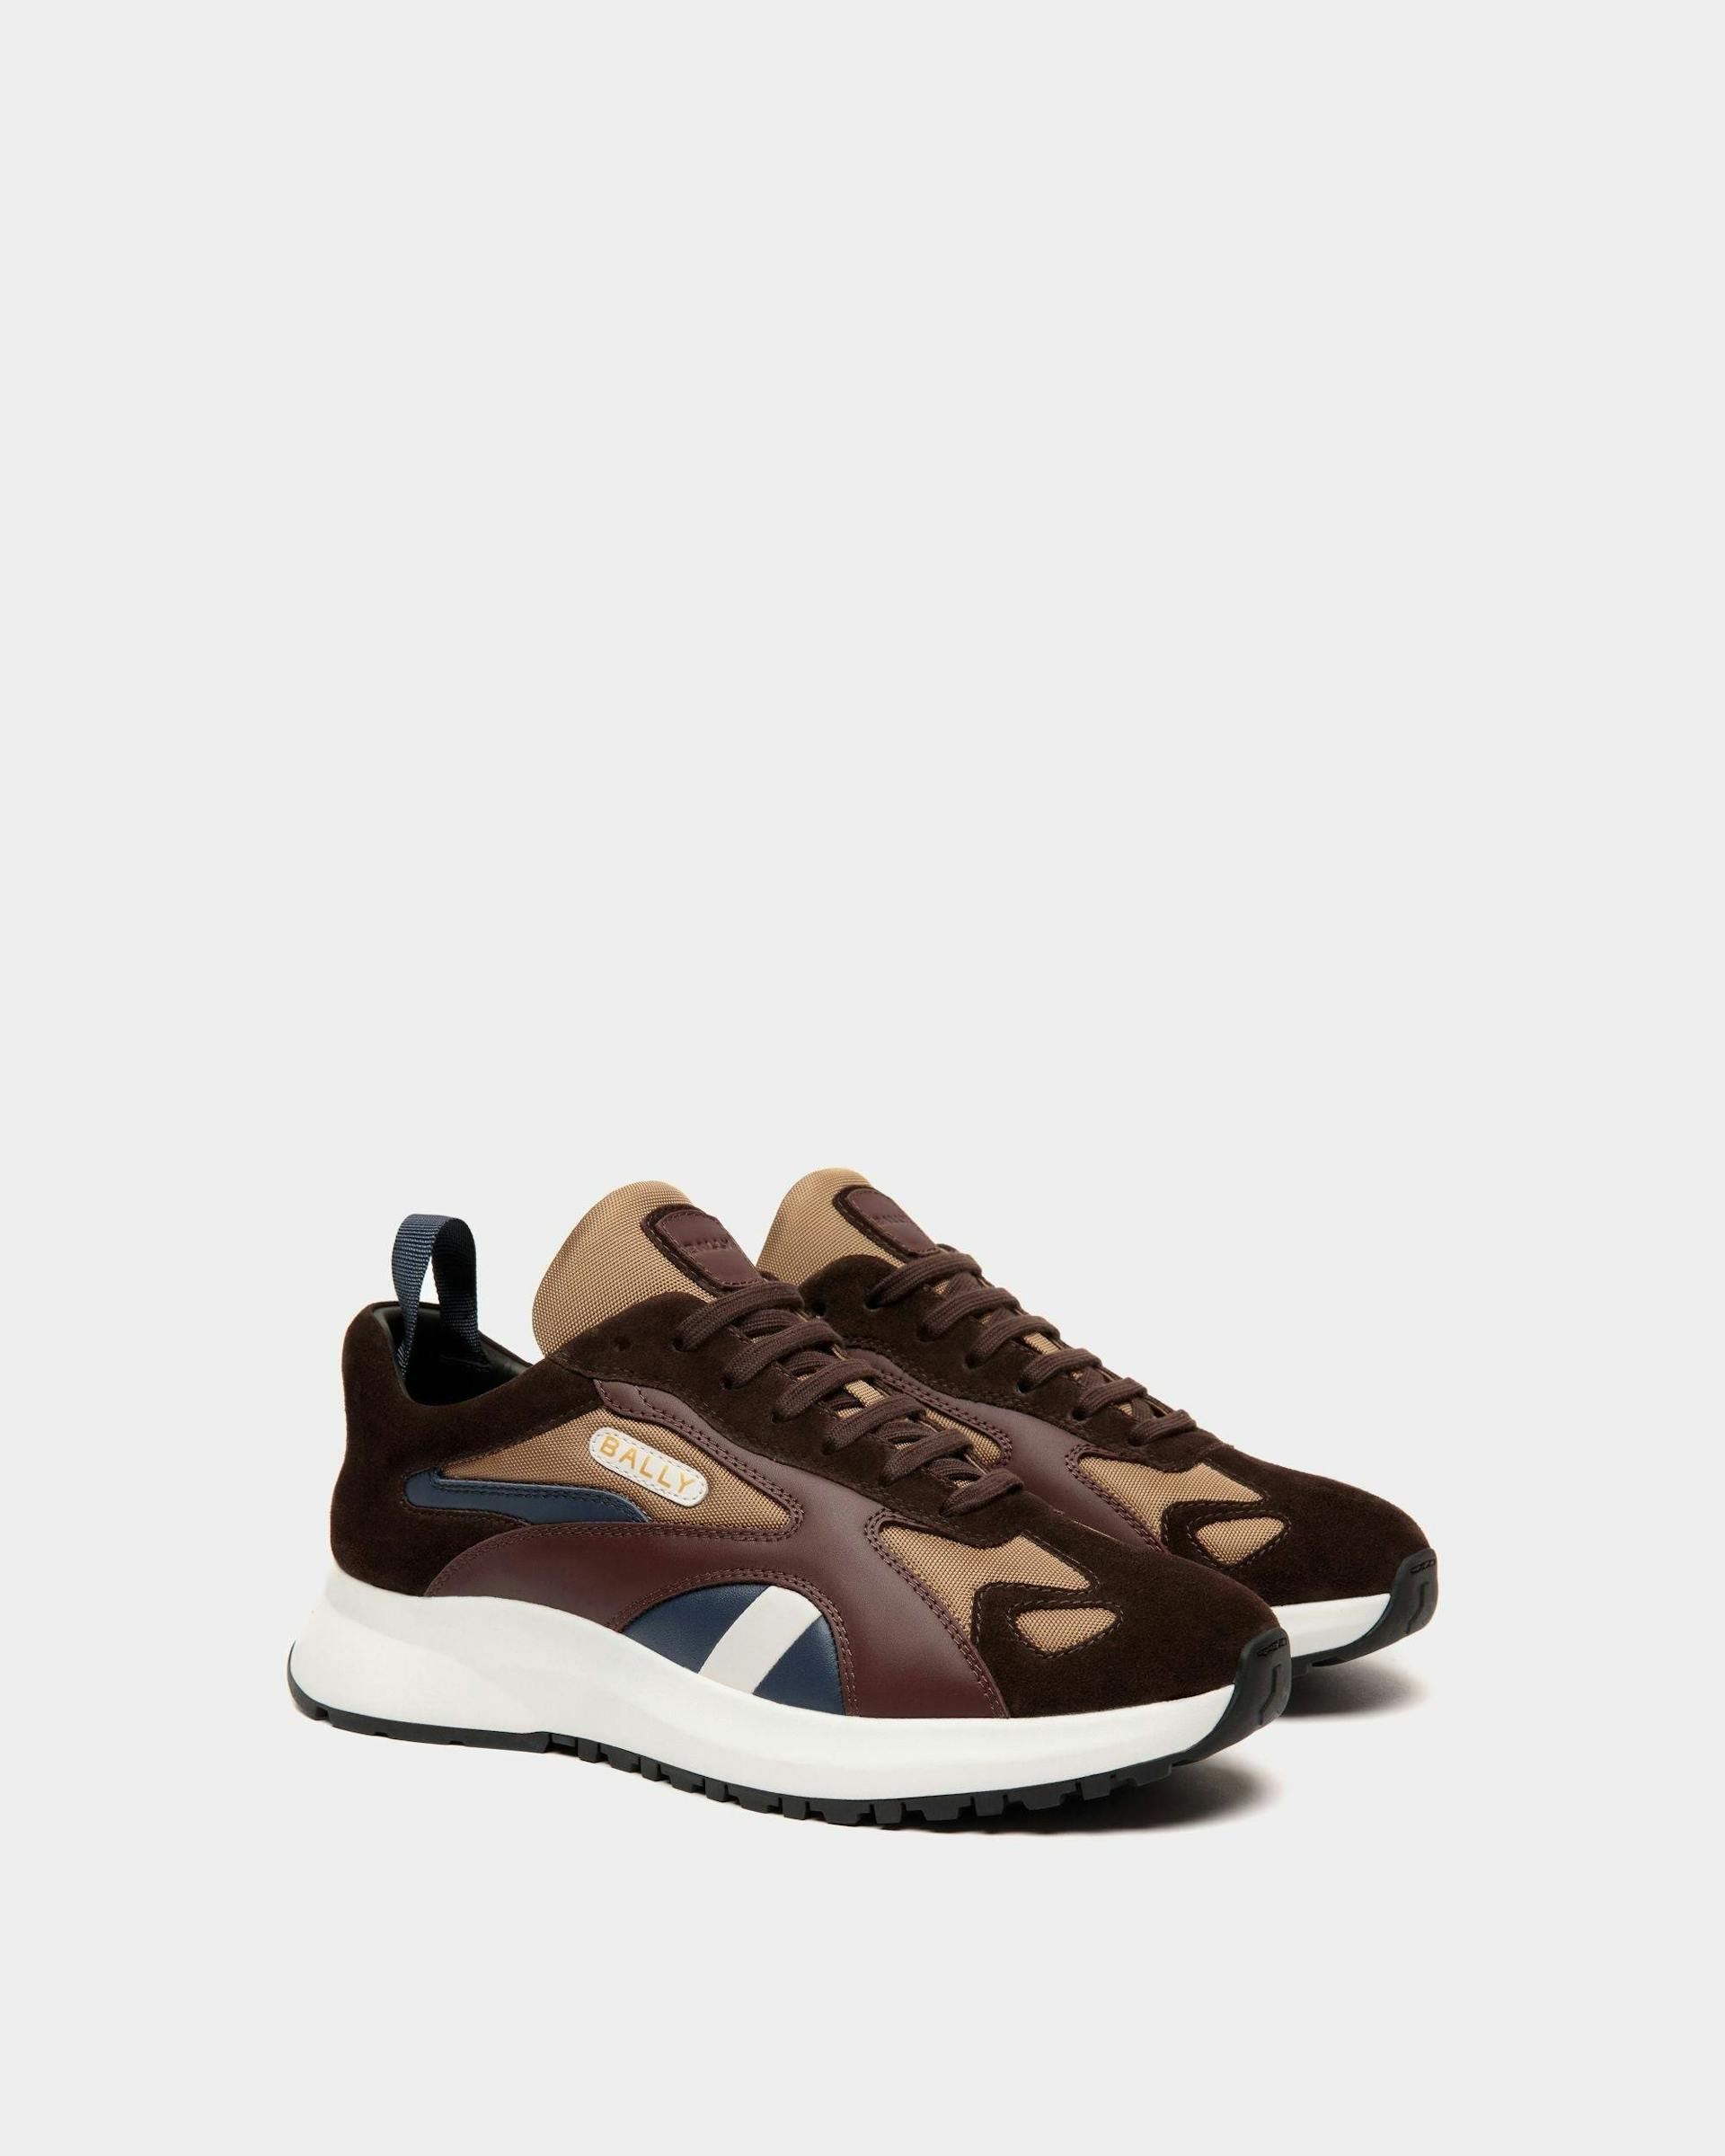 Men's Outline Sneaker in Nylon and Leather | Bally | Still Life 3/4 Front